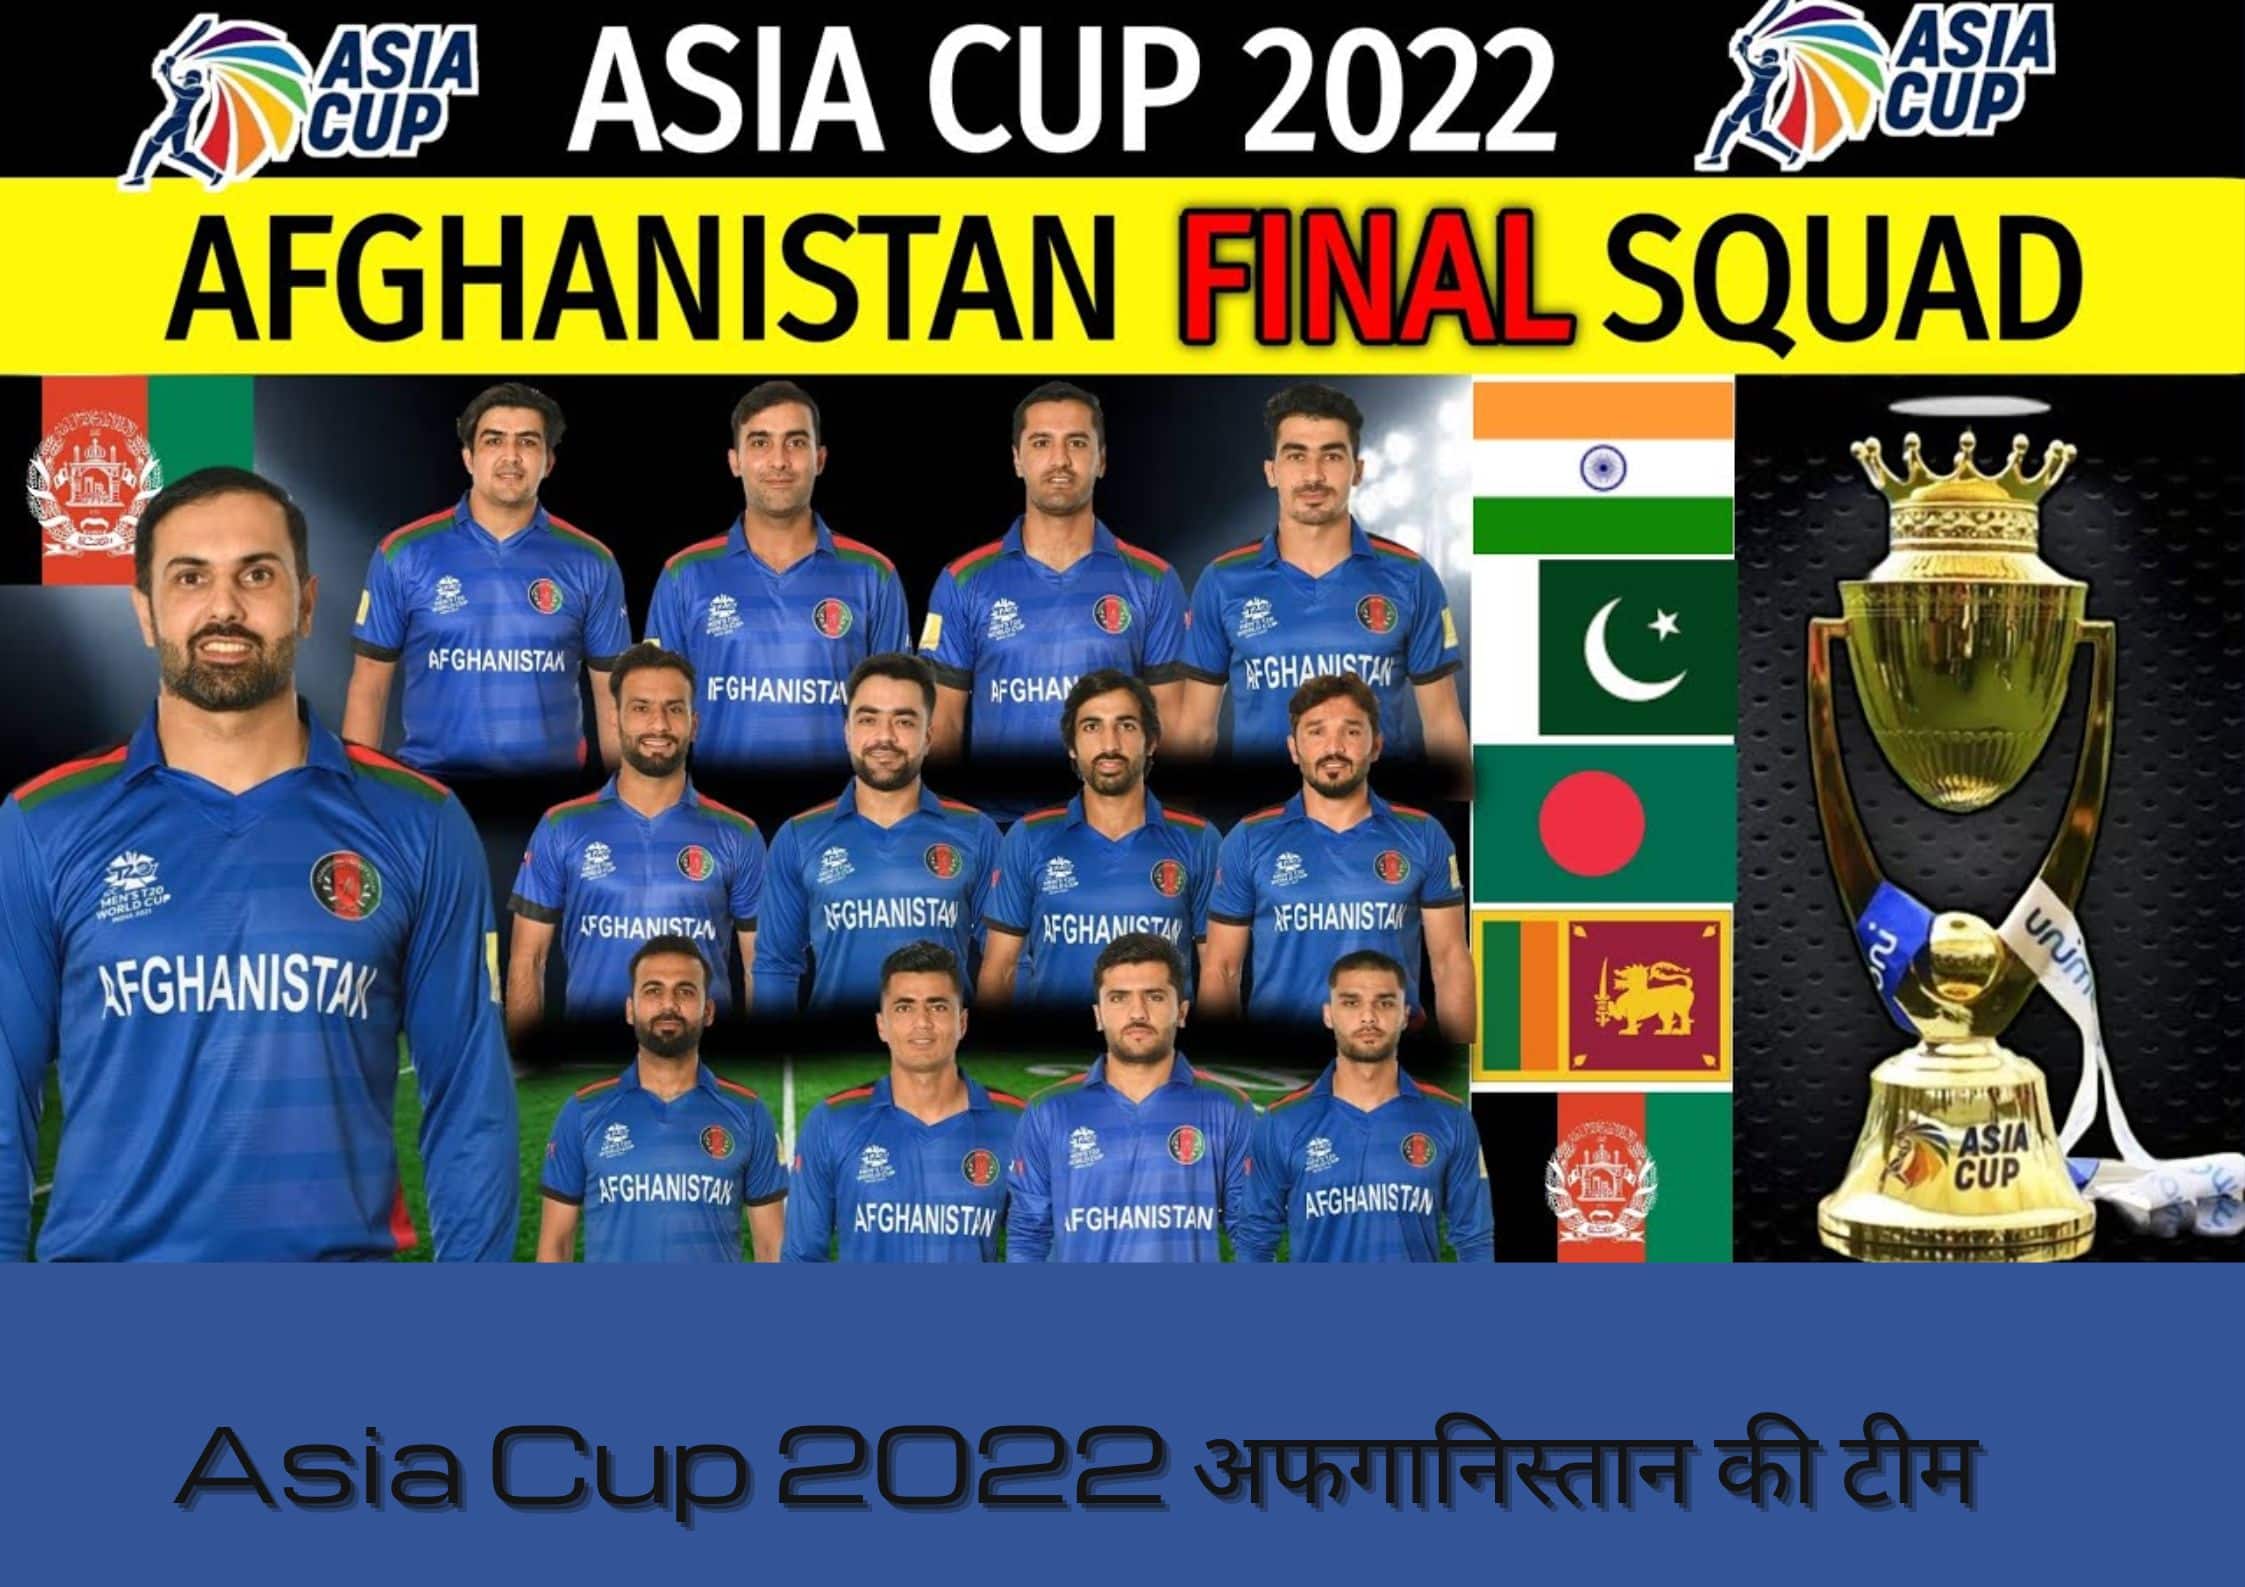 अफगानिस्तान की टीम, Asia Cup 2022 Kis Channel Par Live Aayega फ्री में | Asia Cup 2022 Kis Channel Par Aayega | Asia Cup 2022 लाइव